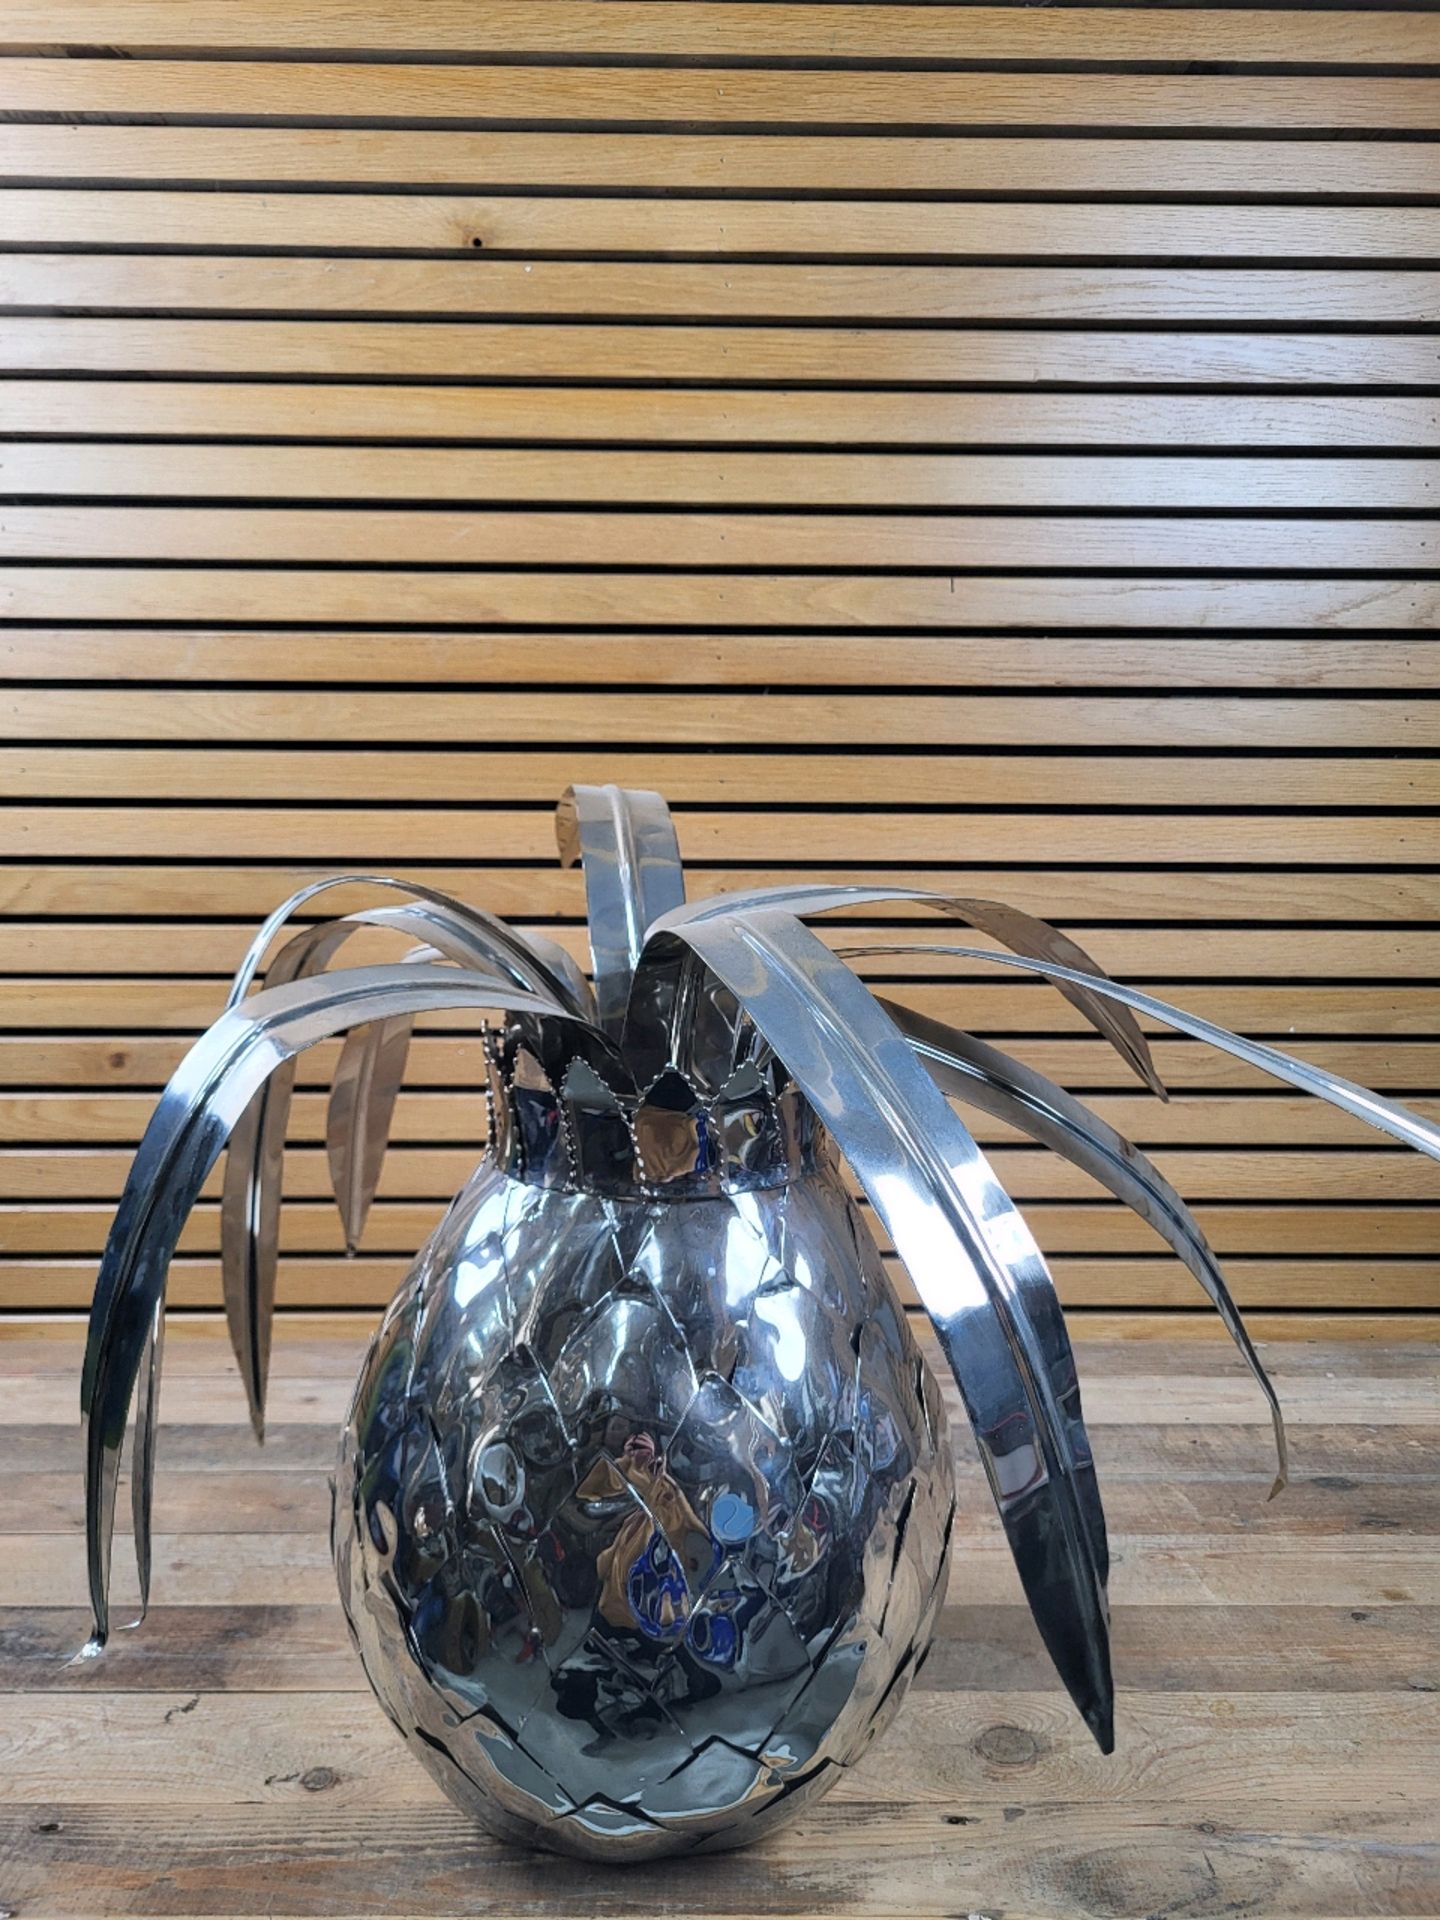 Stainless Steel Pineapple Ornament Sculpture - Image 3 of 3